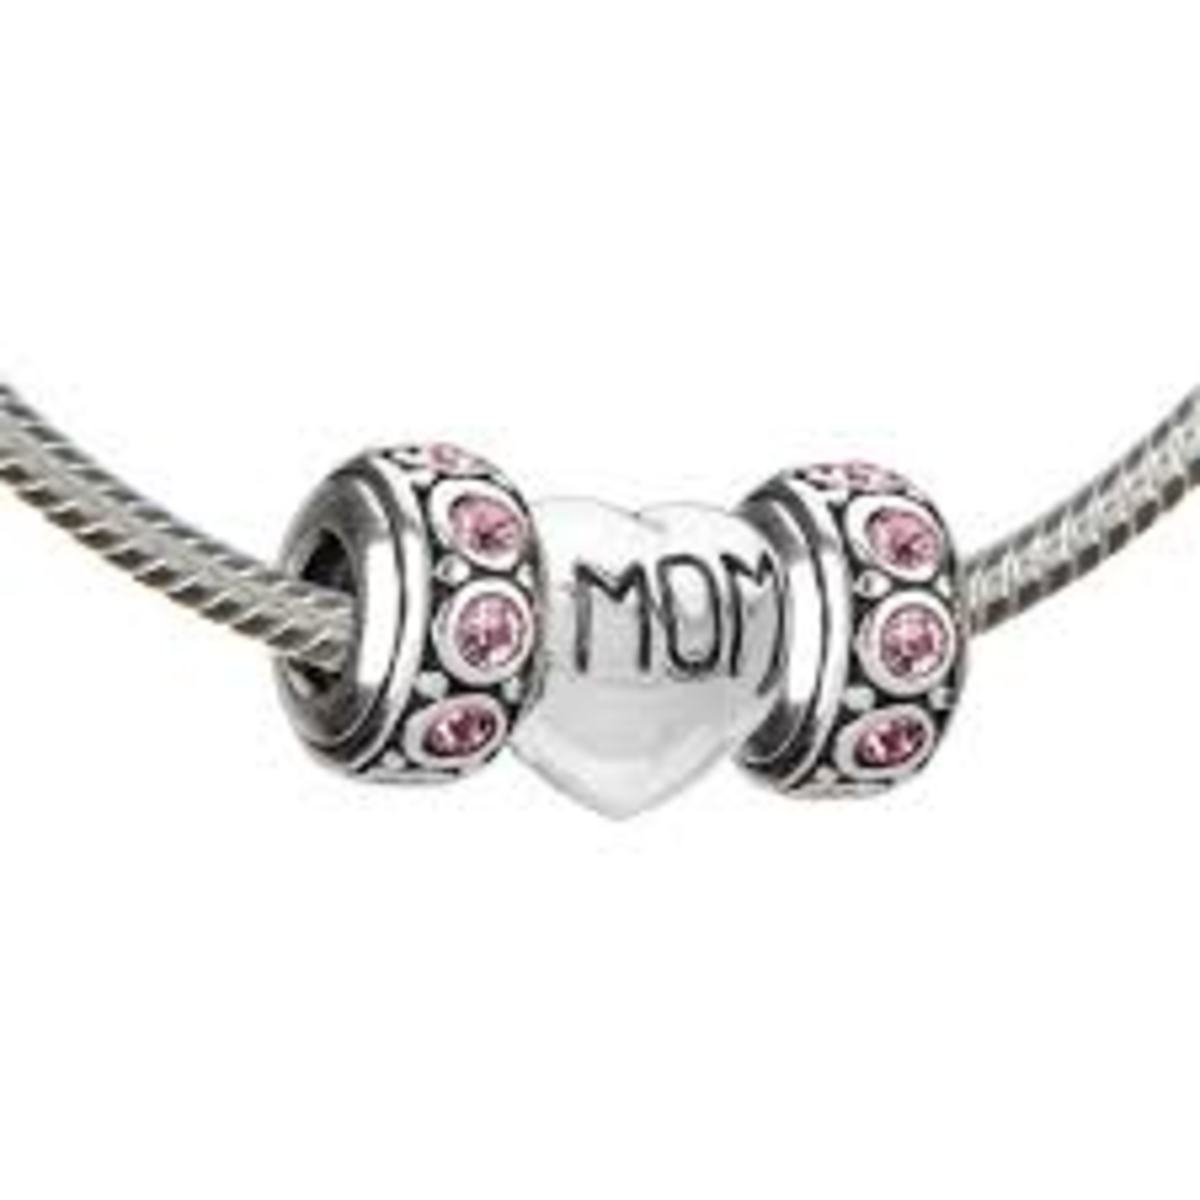 pink design idea for Pandora style beads with two pink euro beads flanking a heart charm with "Mom"